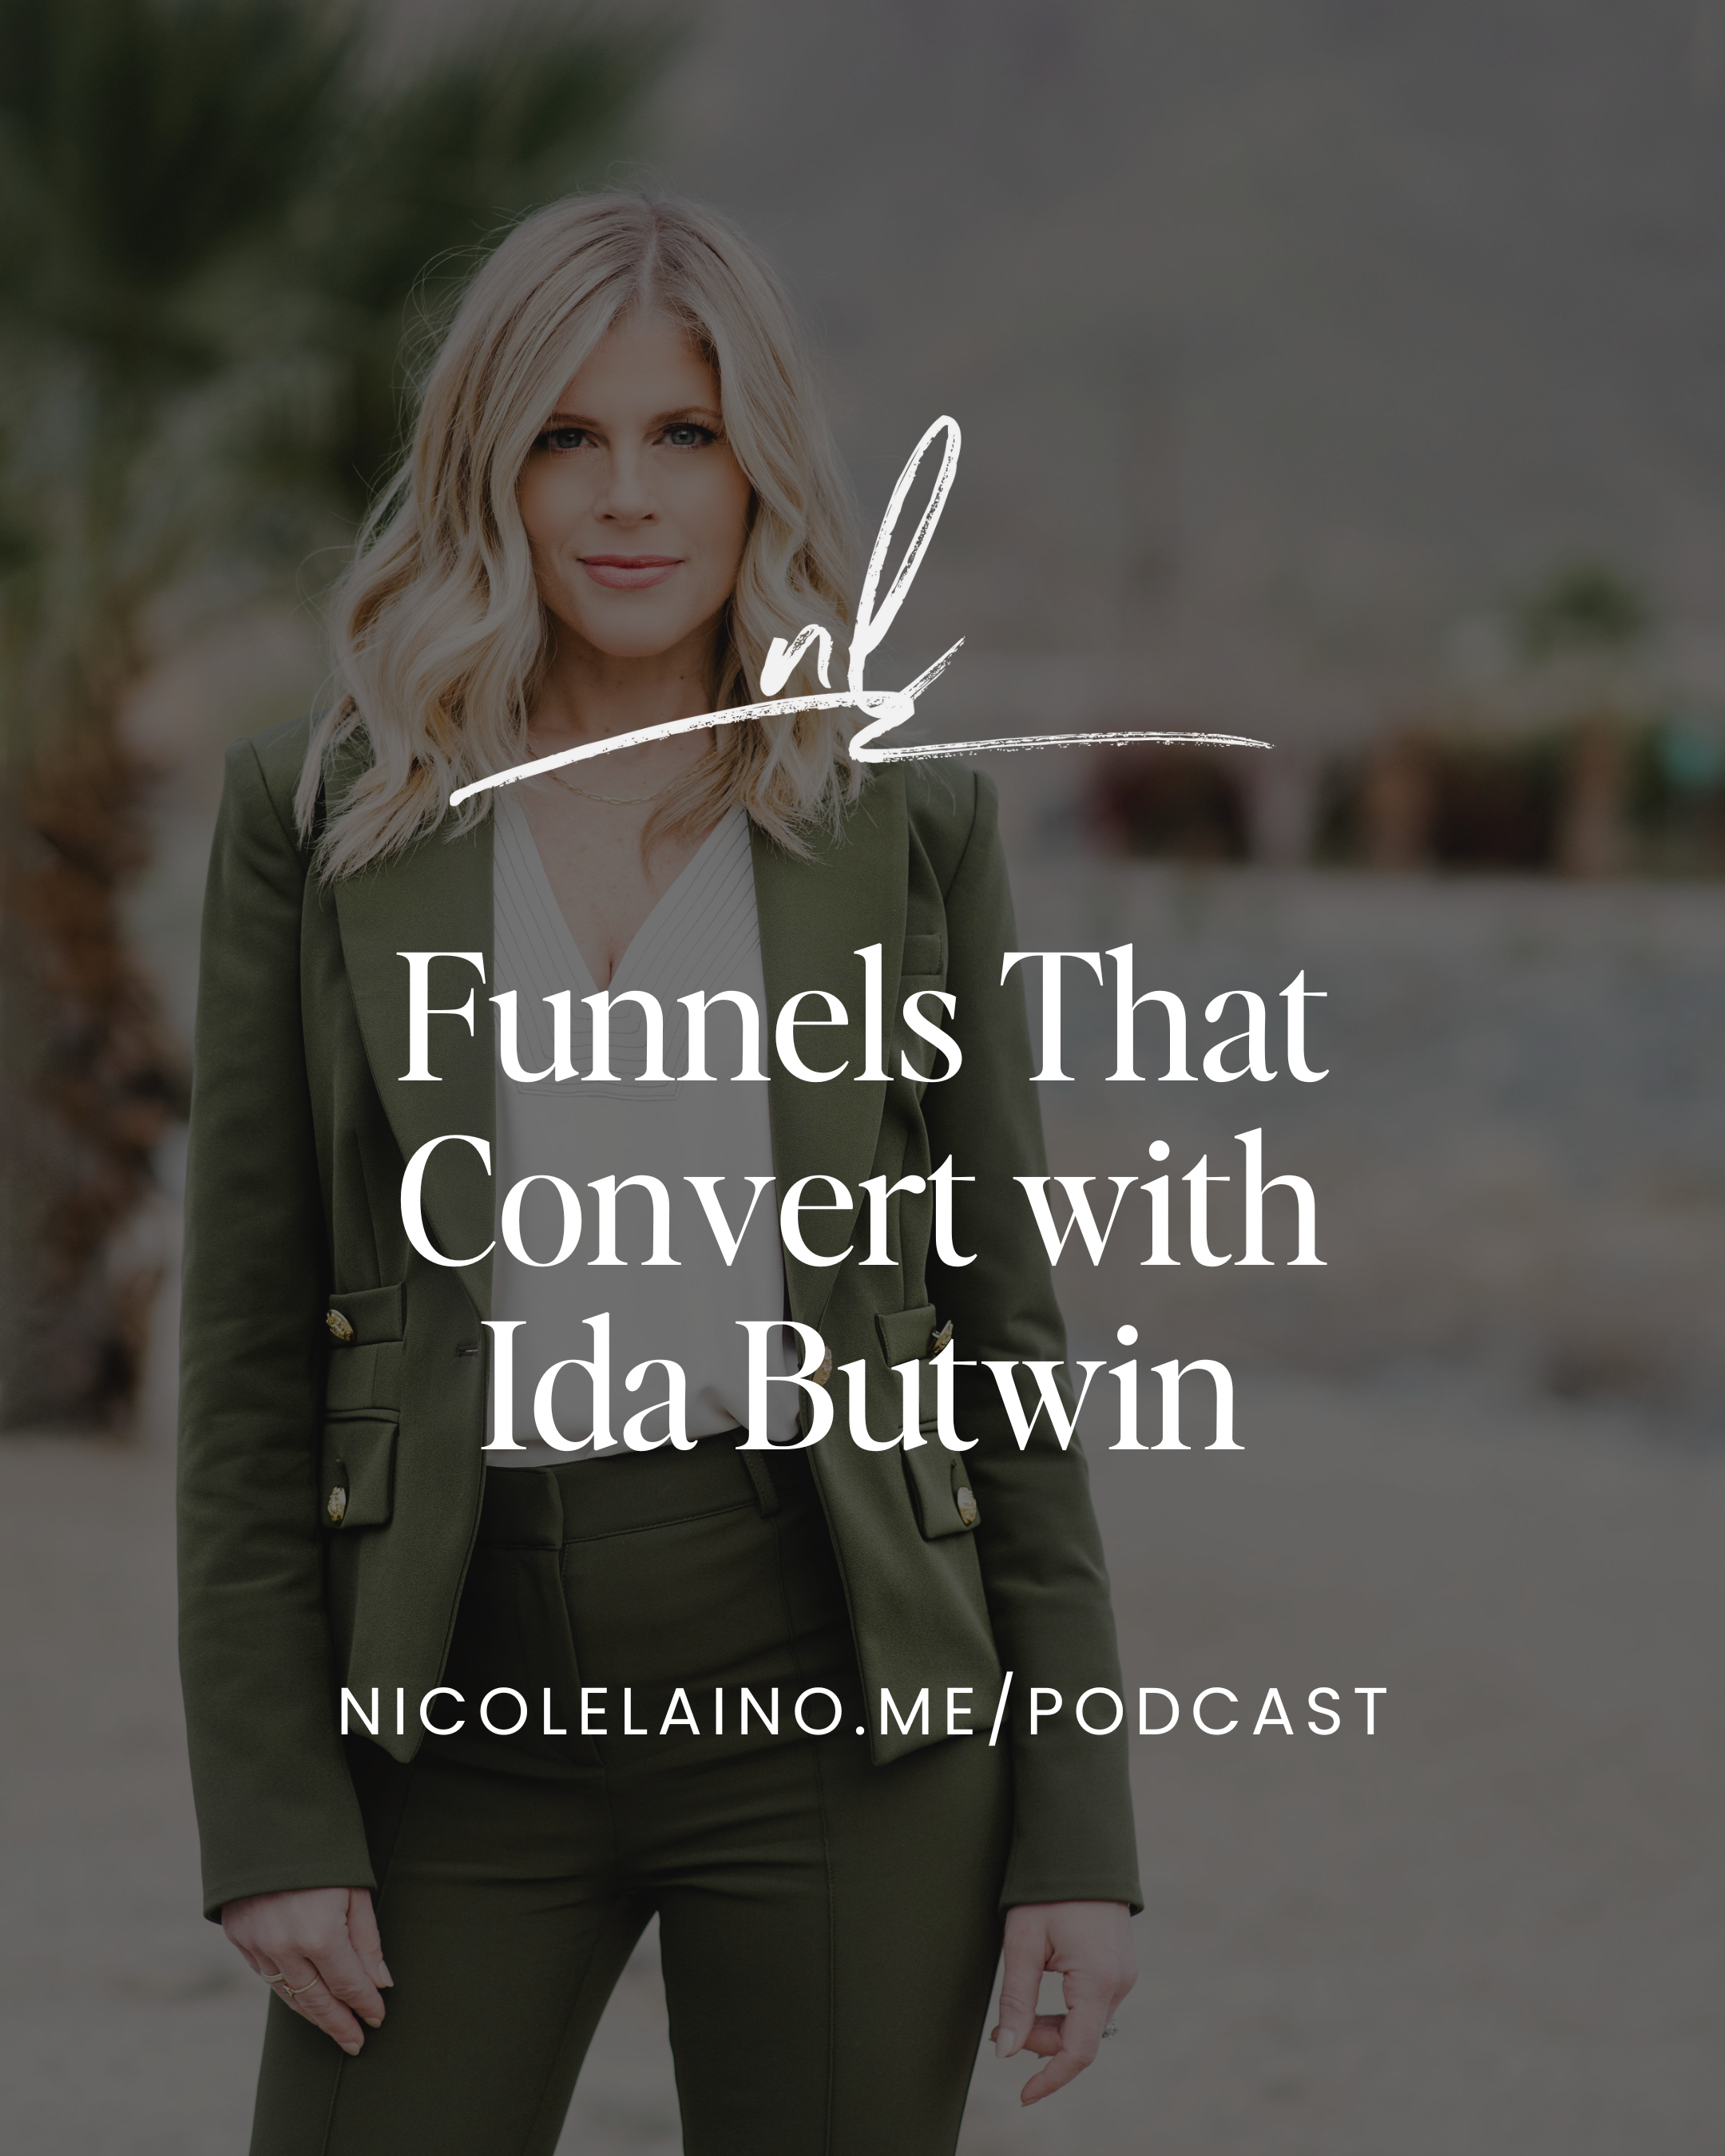 Funnels That Convert with Ida Butwin